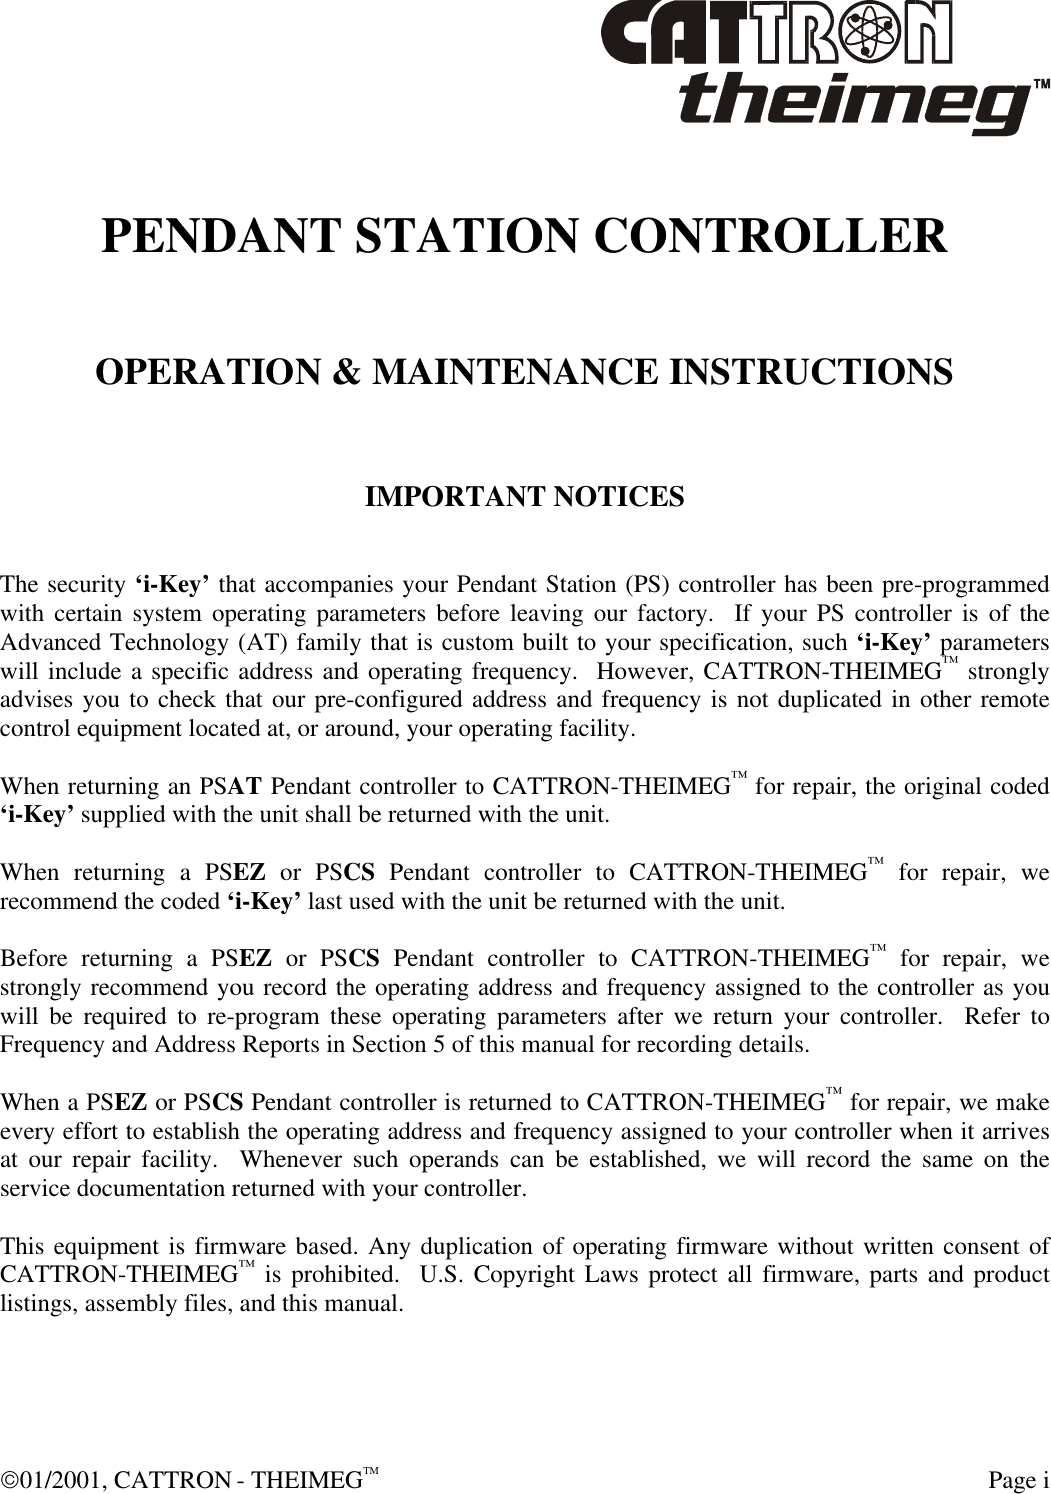  01/2001, CATTRON - THEIMEGTM  Page i  PENDANT STATION CONTROLLER   OPERATION &amp; MAINTENANCE INSTRUCTIONS   IMPORTANT NOTICES   The security ‘i-Key’ that accompanies your Pendant Station (PS) controller has been pre-programmed with certain system operating parameters before leaving our factory.  If your PS controller is of the Advanced Technology (AT) family that is custom built to your specification, such ‘i-Key’ parameters will include a specific address and operating frequency.  However, CATTRON-THEIMEG™ strongly advises you to check that our pre-configured address and frequency is not duplicated in other remote control equipment located at, or around, your operating facility.  When returning an PSAT Pendant controller to CATTRON-THEIMEG™ for repair, the original coded ‘i-Key’ supplied with the unit shall be returned with the unit.  When returning a PSEZ or PSCS Pendant controller to CATTRON-THEIMEG™ for repair, we recommend the coded ‘i-Key’ last used with the unit be returned with the unit.  Before returning a PSEZ or PSCS Pendant controller to CATTRON-THEIMEG™ for repair, we strongly recommend you record the operating address and frequency assigned to the controller as you will be required to re-program these operating parameters after we return your controller.  Refer to Frequency and Address Reports in Section 5 of this manual for recording details.  When a PSEZ or PSCS Pendant controller is returned to CATTRON-THEIMEG™ for repair, we make every effort to establish the operating address and frequency assigned to your controller when it arrives at our repair facility.  Whenever such operands can be established, we will record the same on the service documentation returned with your controller.  This equipment is firmware based. Any duplication of operating firmware without written consent of CATTRON-THEIMEG™ is prohibited.  U.S. Copyright Laws protect all firmware, parts and product listings, assembly files, and this manual.  